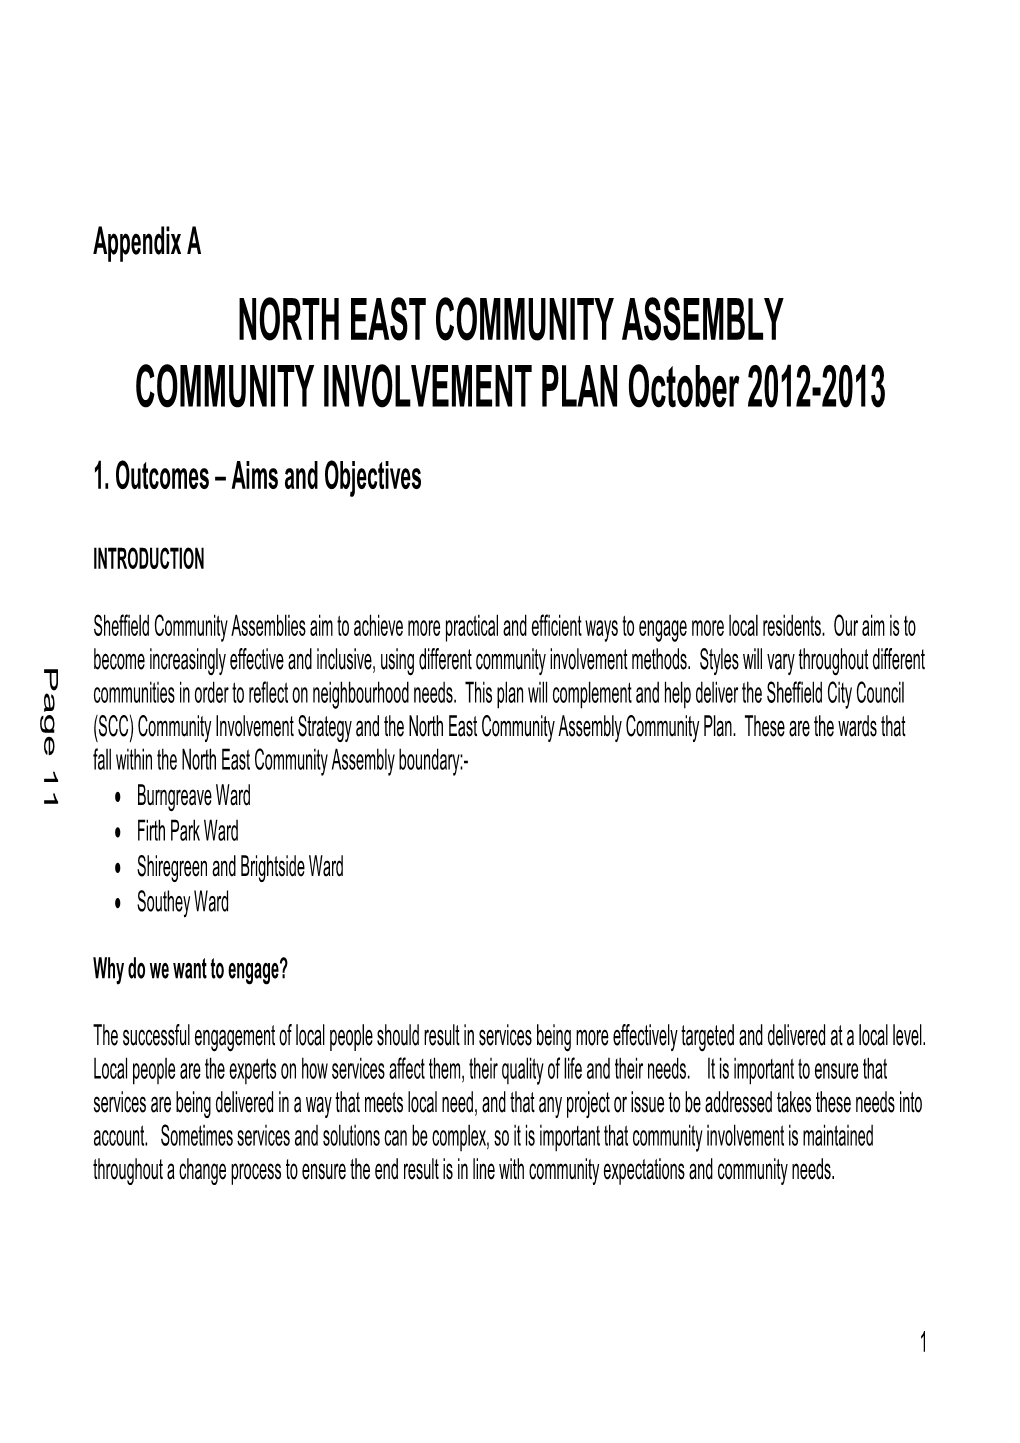 NORTH EAST COMMUNITY ASSEMBLY COMMUNITY INVOLVEMENT PLAN October 2012-2013